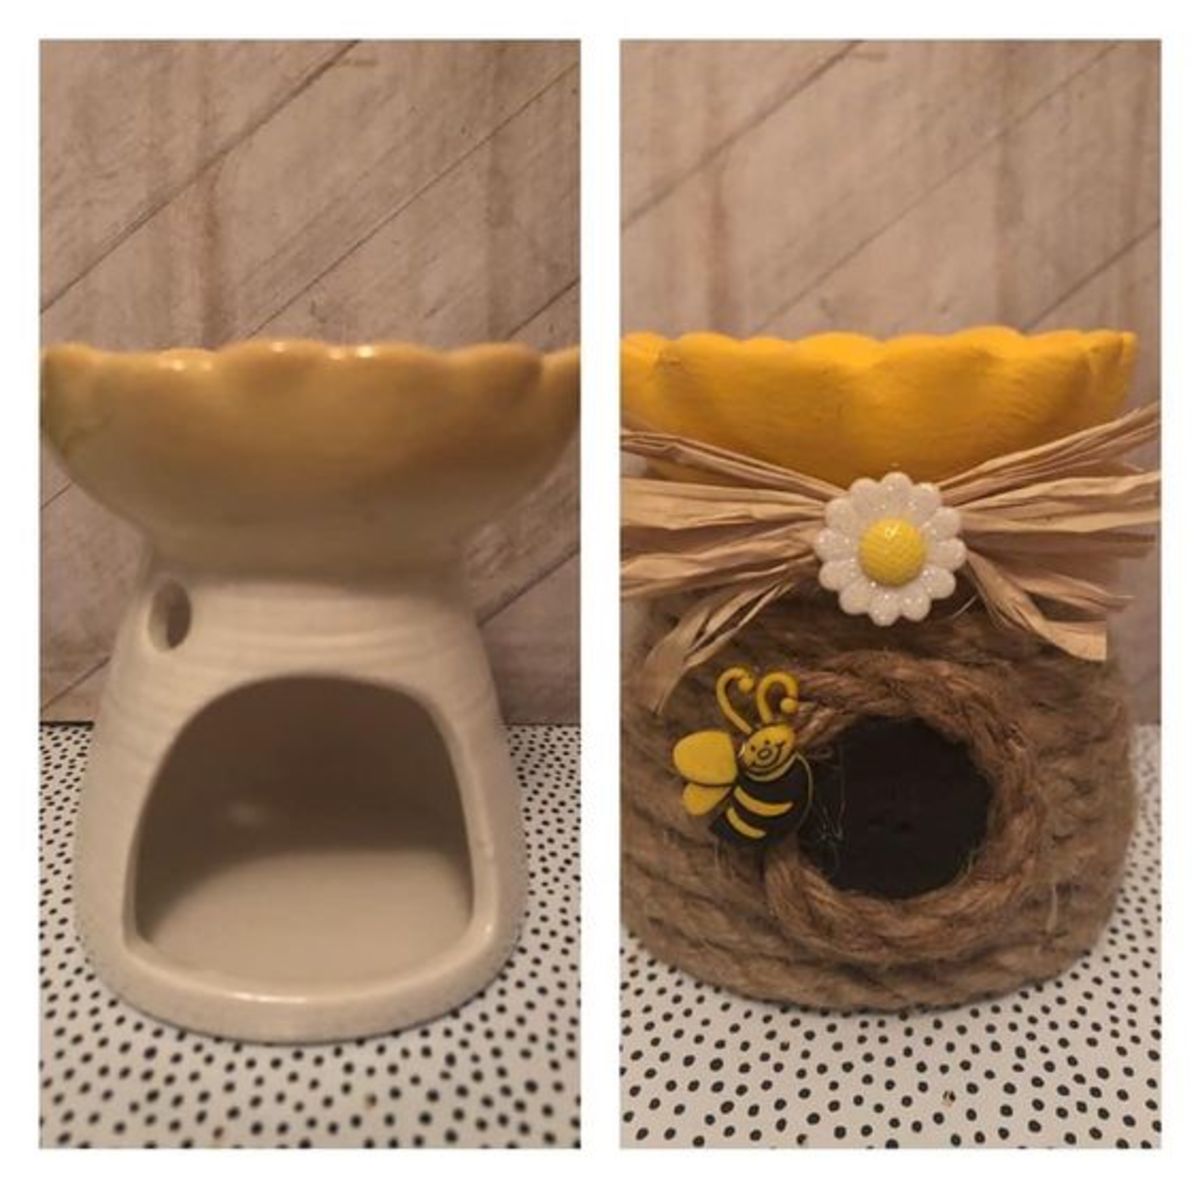 Here's another jute beehive idea. This one uses a candleholder.